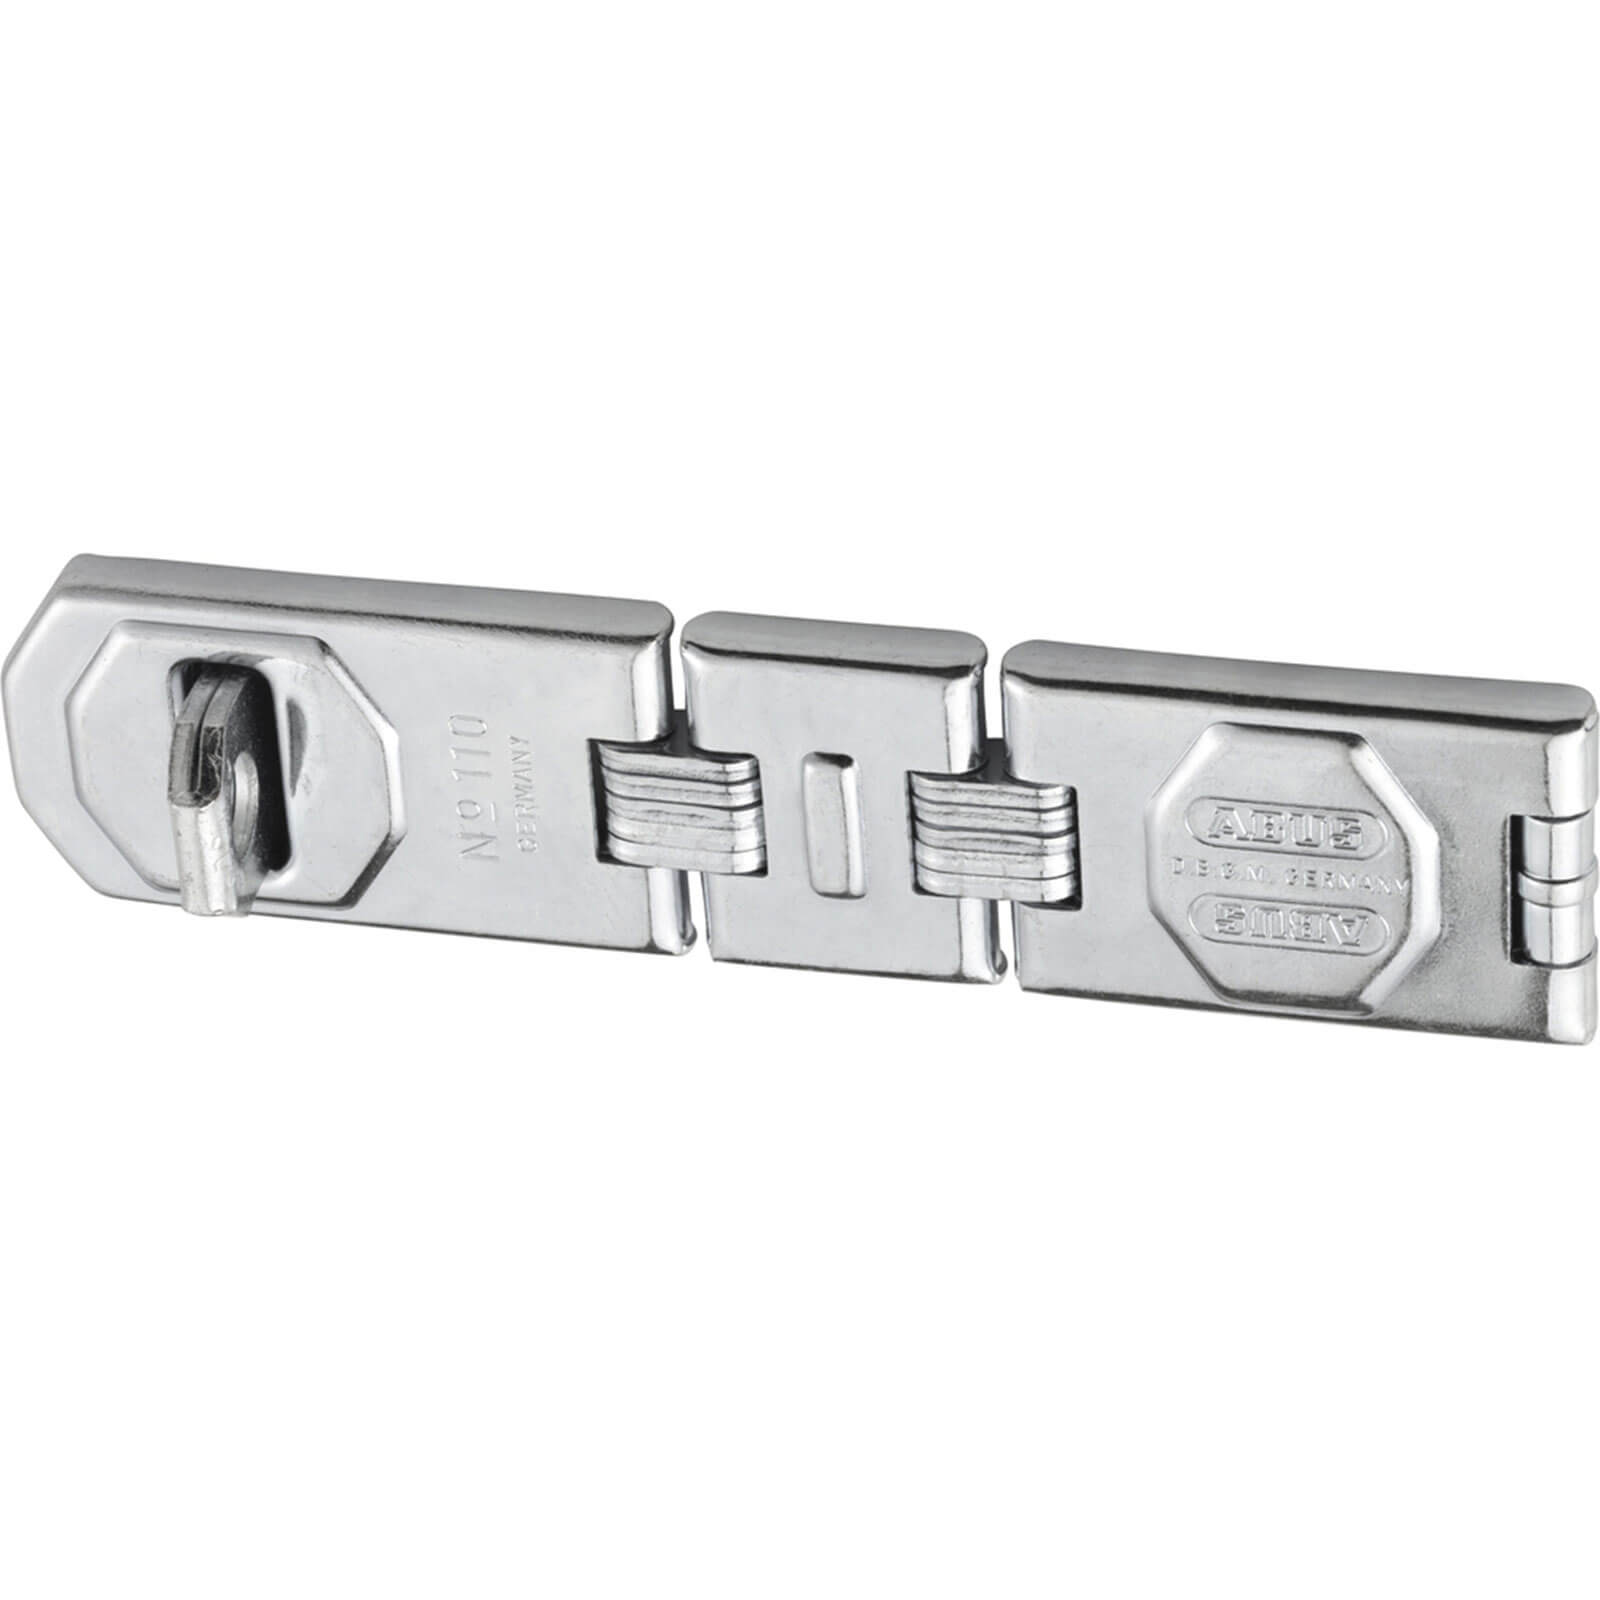 Image of Abus 110 Series Universal Hasp and Staple Double Jointed 195mm